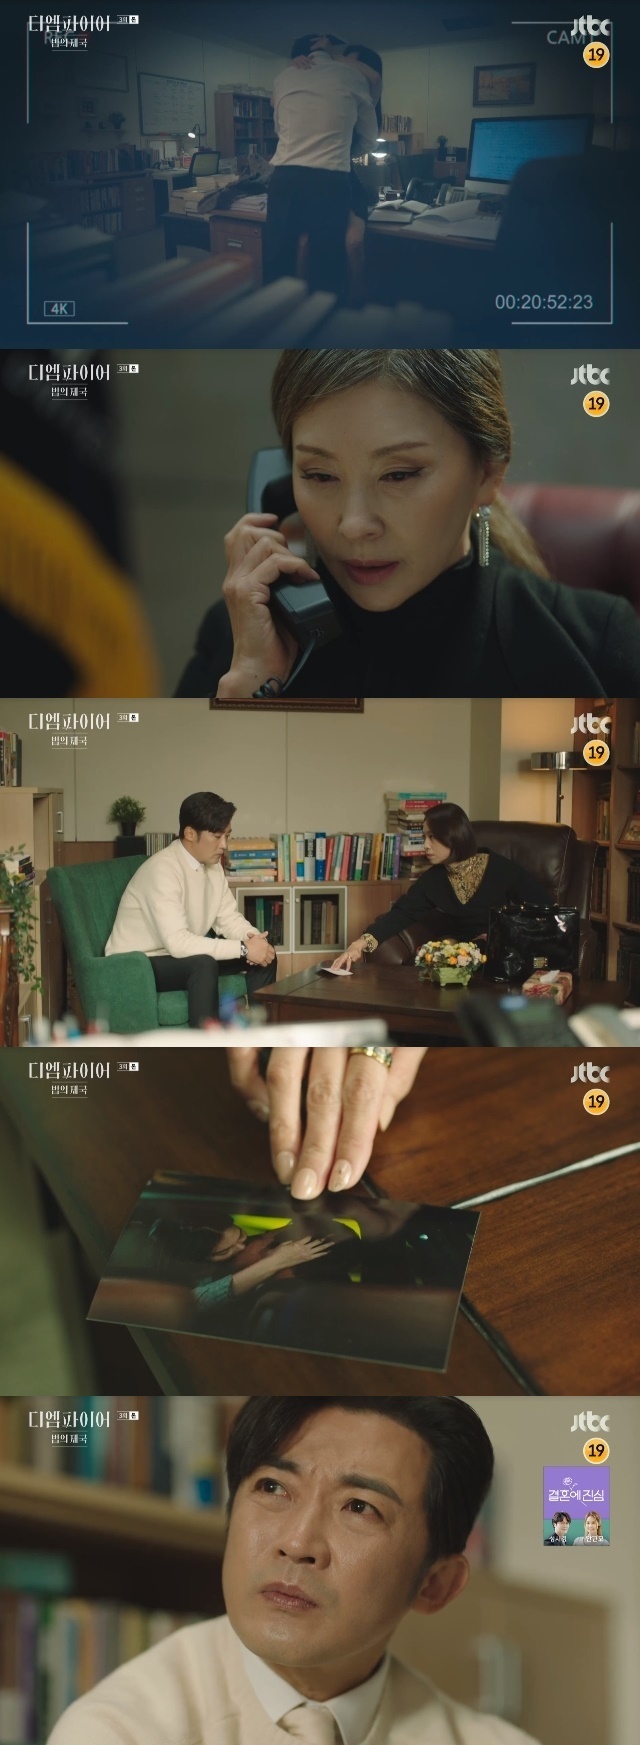 Ahn Jae-wooks Affair has been discovered even in Two Sisters In Law following Zhang Mo.In the third episode of the JTBC Saturday drama The Empire of Law (played by Oh Ga-gyu and directed by Yoo Hyun-ki), which was broadcast on October 1, the fact of the affair of Ahn Jae-wook was gradually rising to the surface.On this day, Ham Kwang-jeon (Lee Mi-sook) secretly watched all of his son-in-law Na Geun-woo exchanging dense skinships with his student, Hong Nan-hee (Kim Myung-ji), in the professors room.Ham Kwang-jeon called Na Geun-woo on the extension phone when they seemed to work in the professors office, and informed him that he would stop by Na Geun-woos office soon.Ham Kwang-jeon then visited the professors office where Hong Nan-hee left hastily, and he is going to go to the hotel with Hong Nan-hee.Dont drag you in the house dirty, Warning said.The problem is that Zhang Mo is not the only one who learned about the Affair of Na Geun-woo.Han Hye-ryul (Kim Sun-a) recently launched an investigation into the people involved in the Christmas fund to Chung Jo-joon and his sister Han Moo-ryul (Kim Jong-min)s in-laws group without sanctuary.The pressure of the in-laws came to Na Geun-woo. I think its funny that the professor points out the conscience and responsibility of entrepreneurs.Im not close to my brother Two Sisters In Law, and Im not polite to the big picture drawings of me.It would be better not to say its hard, its Mali unconditionally, he said.In the meantime, the picture of the Hanmoo was a kiss scene of Na Geun-woo and Hong Nan-hee. Han Moo-ryul laughed at Na Geun-woo, who was surprised, saying, I know everything except the parties.When I said that Han Hye-ryul and (former brother-in-law) Go Won-kyung (Kim Hyung-mook) were in a duty, the problem of Ko Won-kyung receiving a corporate entertainment was well finished, but why did I divide it?I didnt say what Han Hye-ryul said. Its not about now. I dont want to be a problem later.If this is a problem, you will be cut off. The end of the day, the professor and his disciples are like this?I do not think you are in a position to talk about ethics to others. Among them, he hit Na Geun-woos back to his father-in-law, Han Geon-do (Young-chang Song).Han Gun-do gave a tip to his close inspectors and politicians, saying, If you shake me, everything will pop out.He said, When I was a judge of his son, he brought me something that I was tired of because of his debt.Ill wrap it up on that shit paper and hand it over. Youre going to take the lead.I will hand it to the computer neatly, so shake it off. Since then, the prosecution has searched the office of Han Gun-do, a representative lawyer of the law firm Ham-An-ri, and confiscated all the weaknesses of Na Geun-woo.